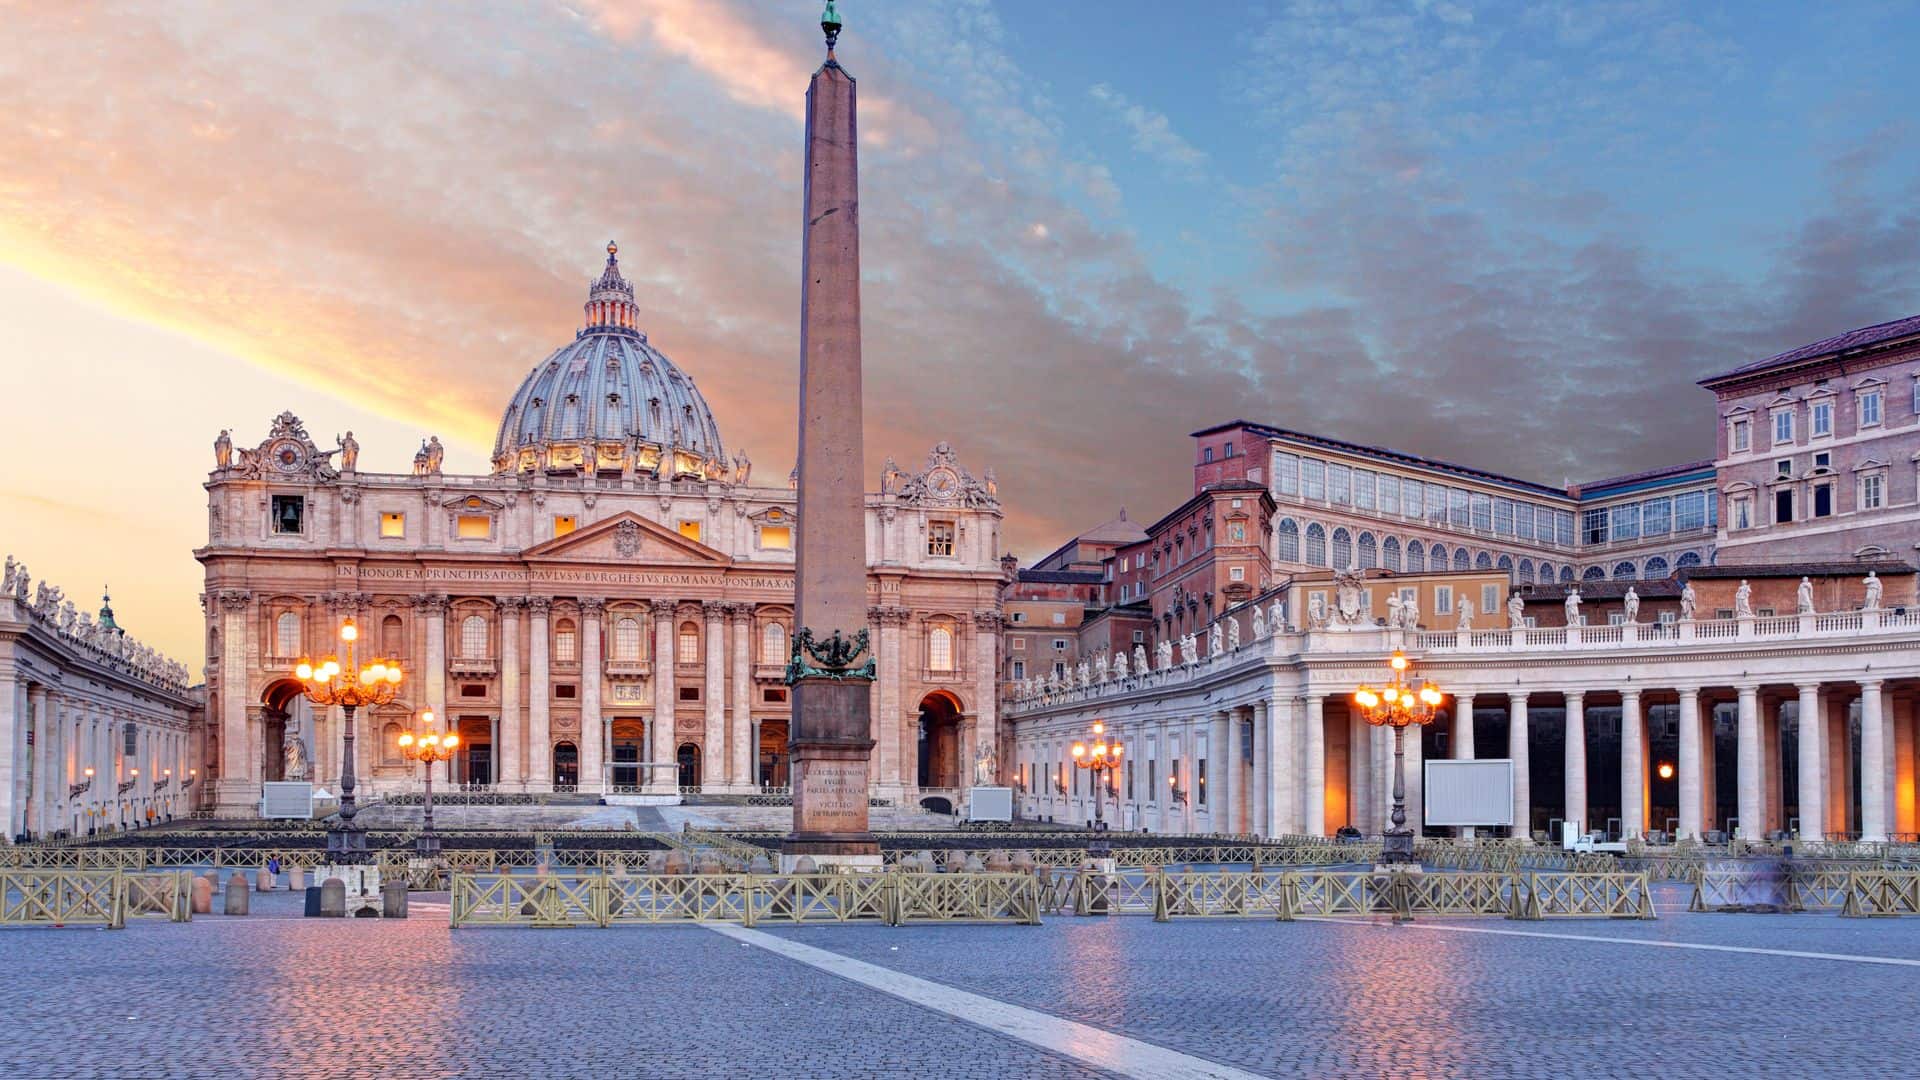 St. Peter's Basilica in Rome at sunset